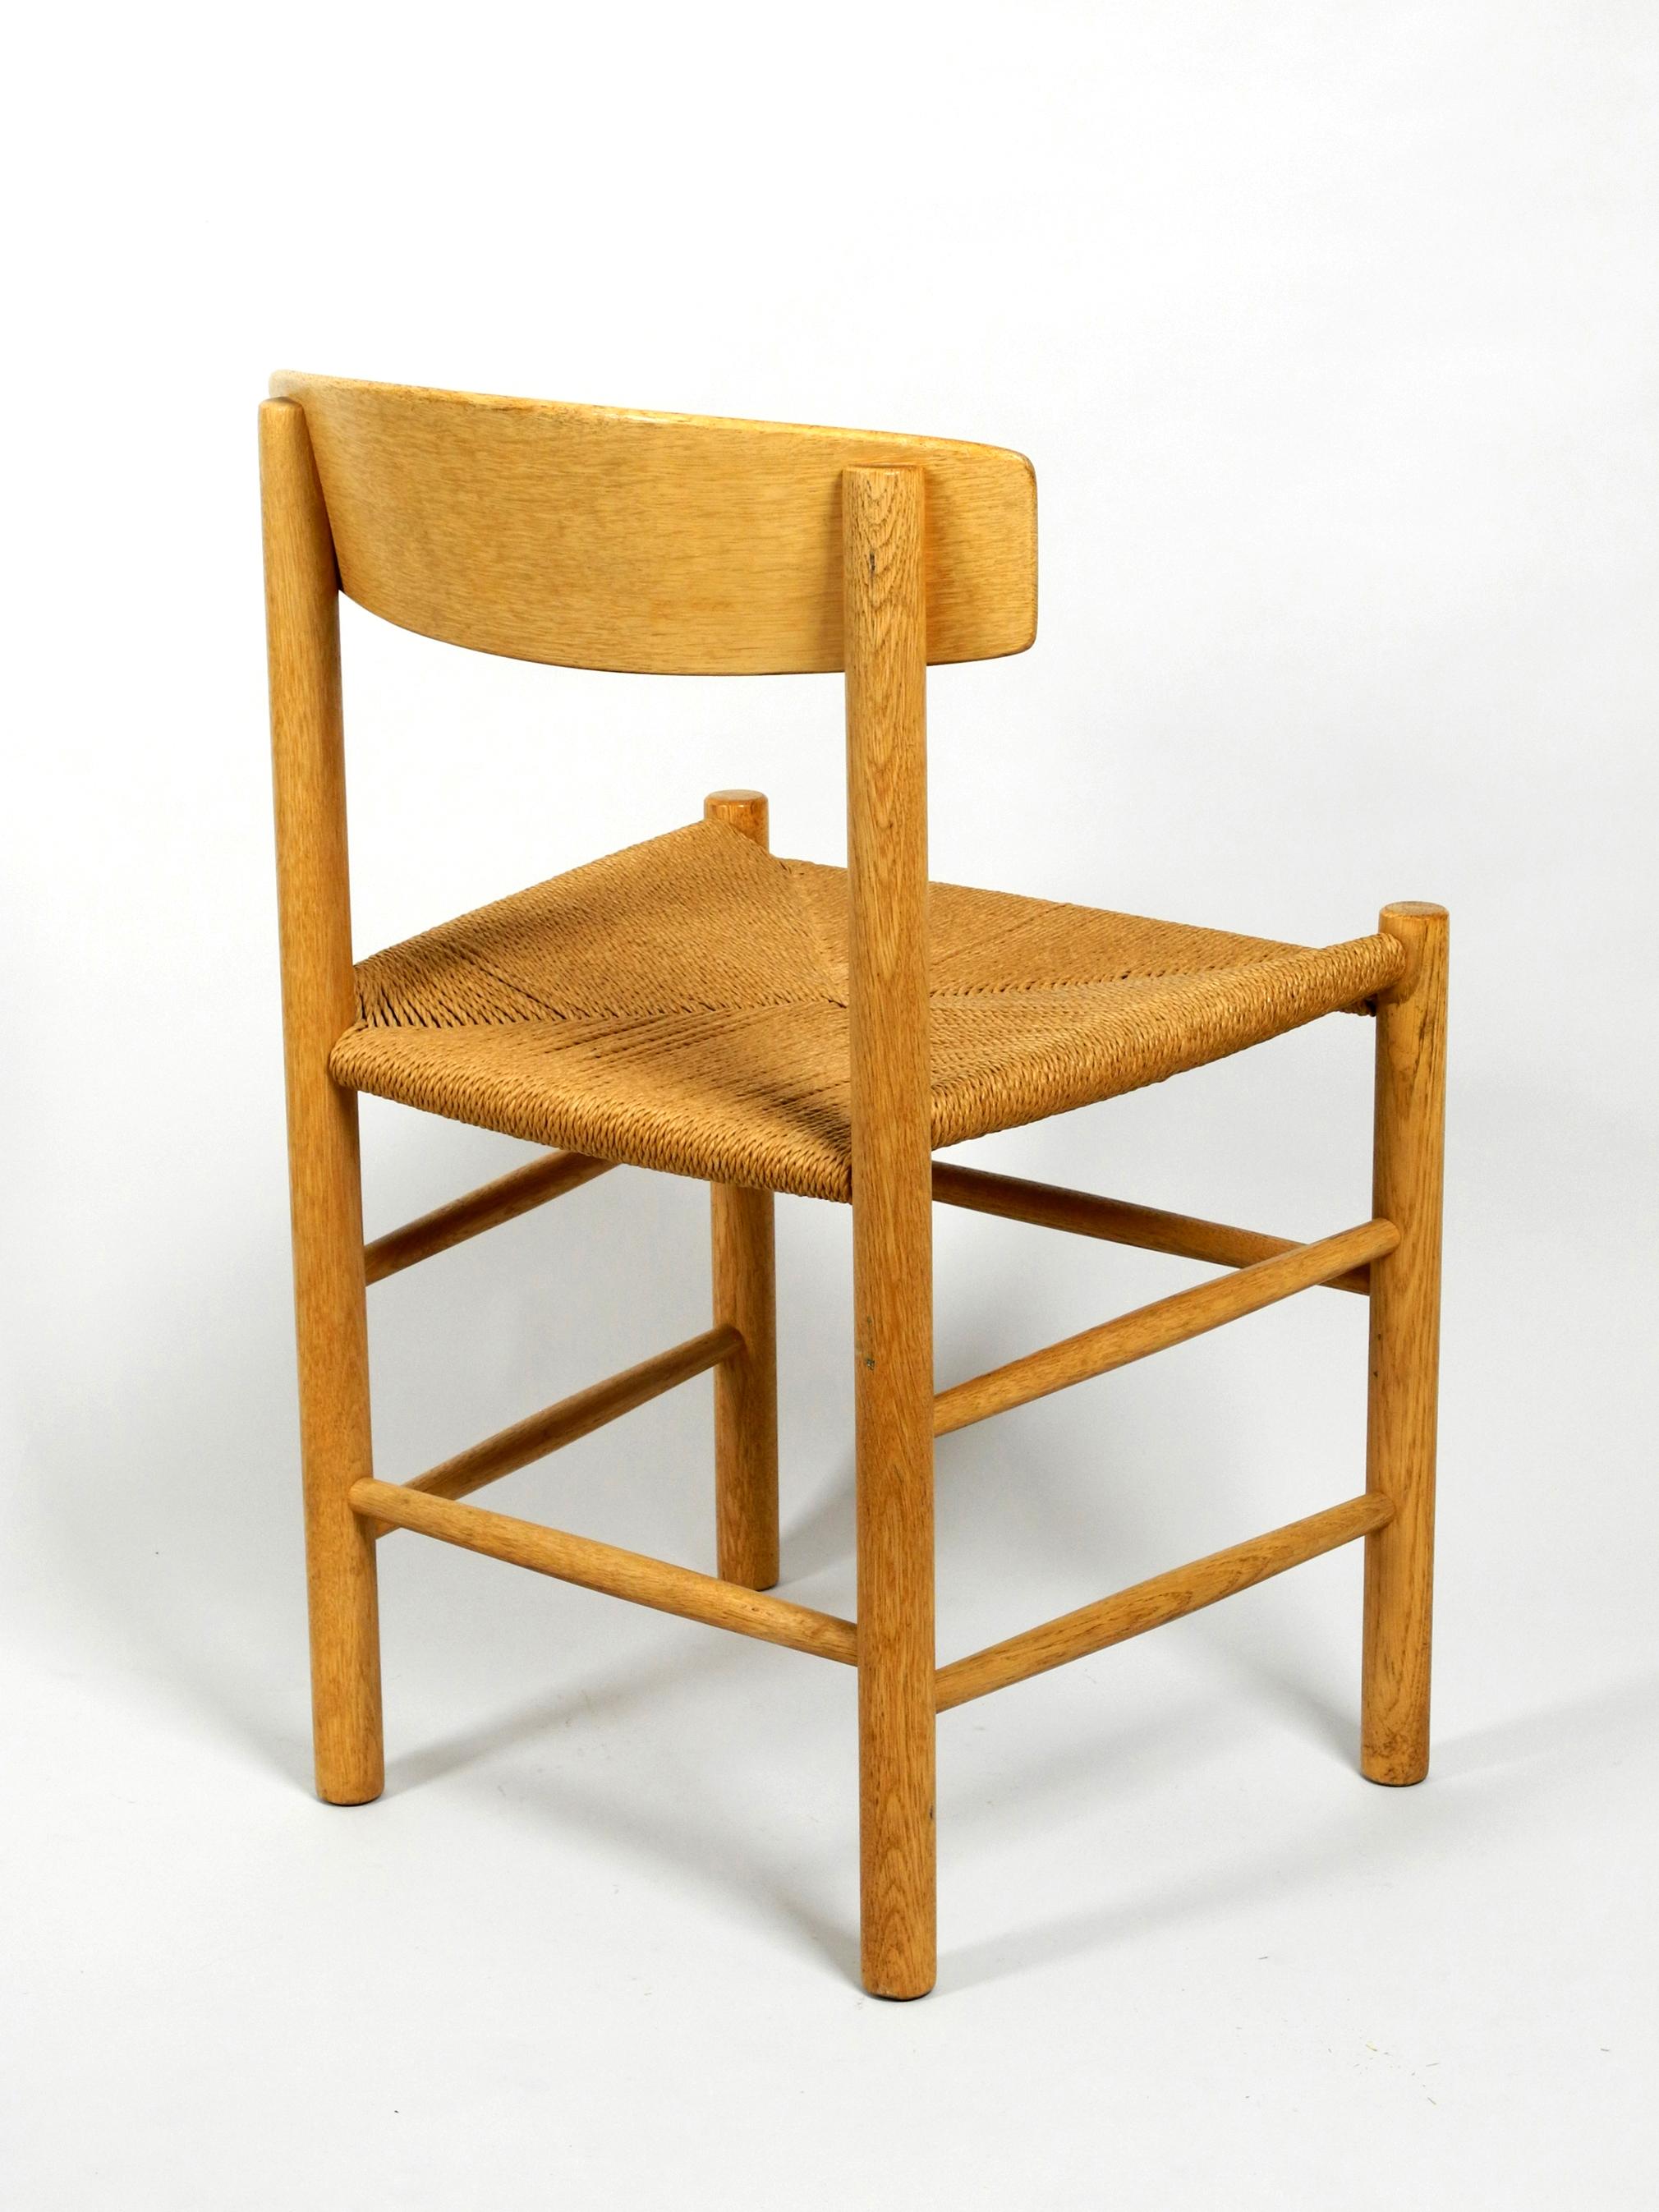 Four J39 Mogensen Chairs in Oak and Cord Weaving by Børge Mogensen Fredericia 4